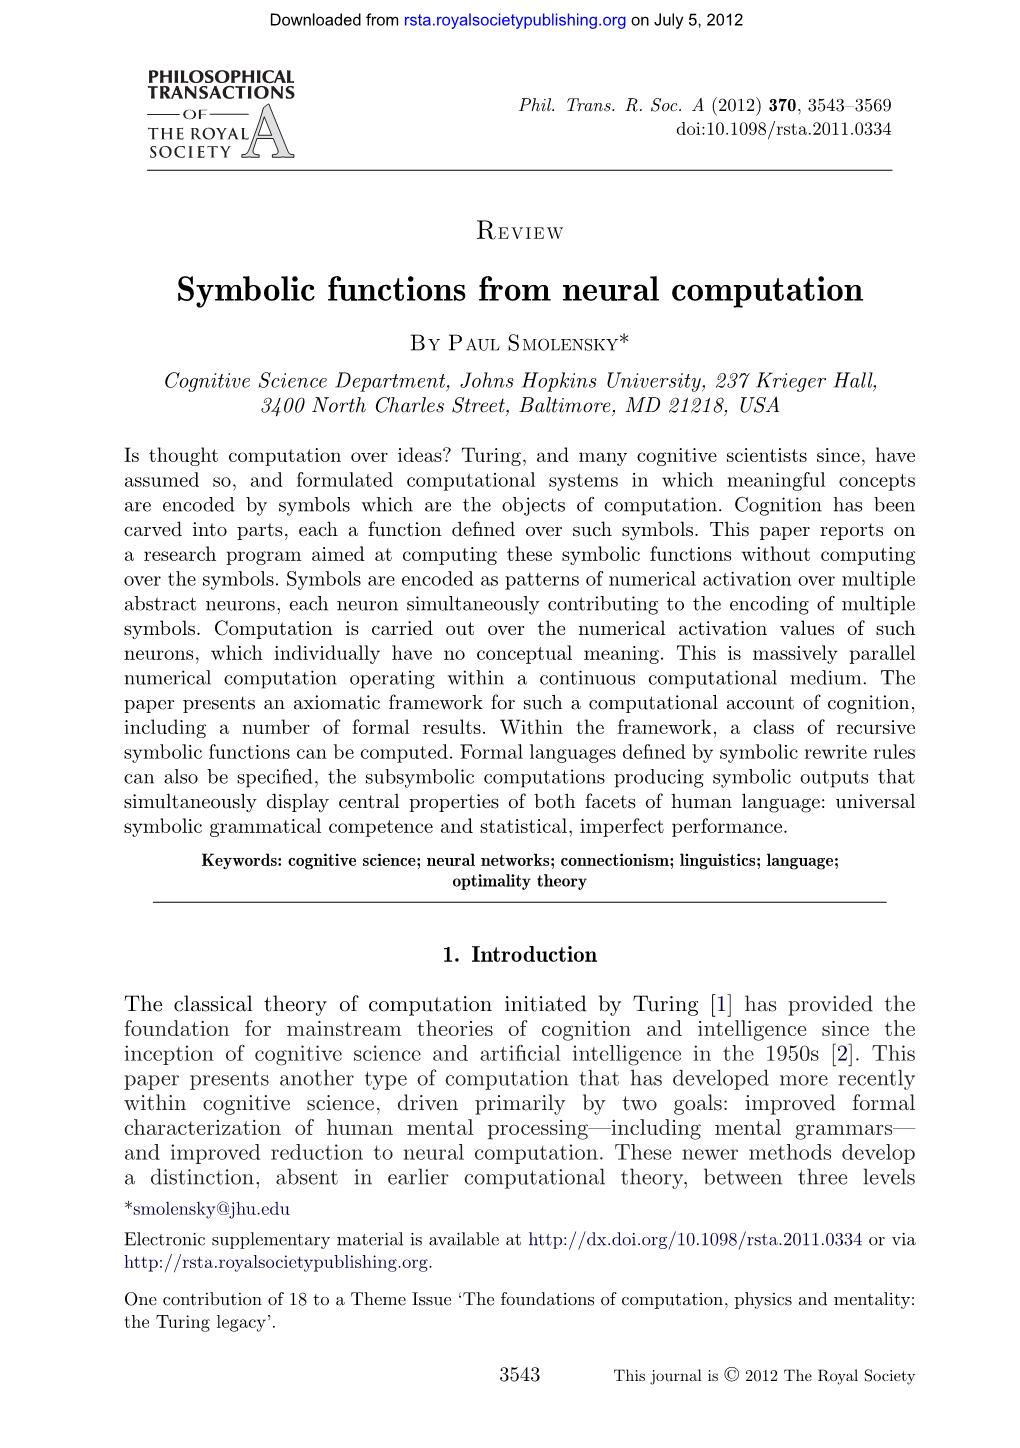 Symbolic Functions from Neural Computation